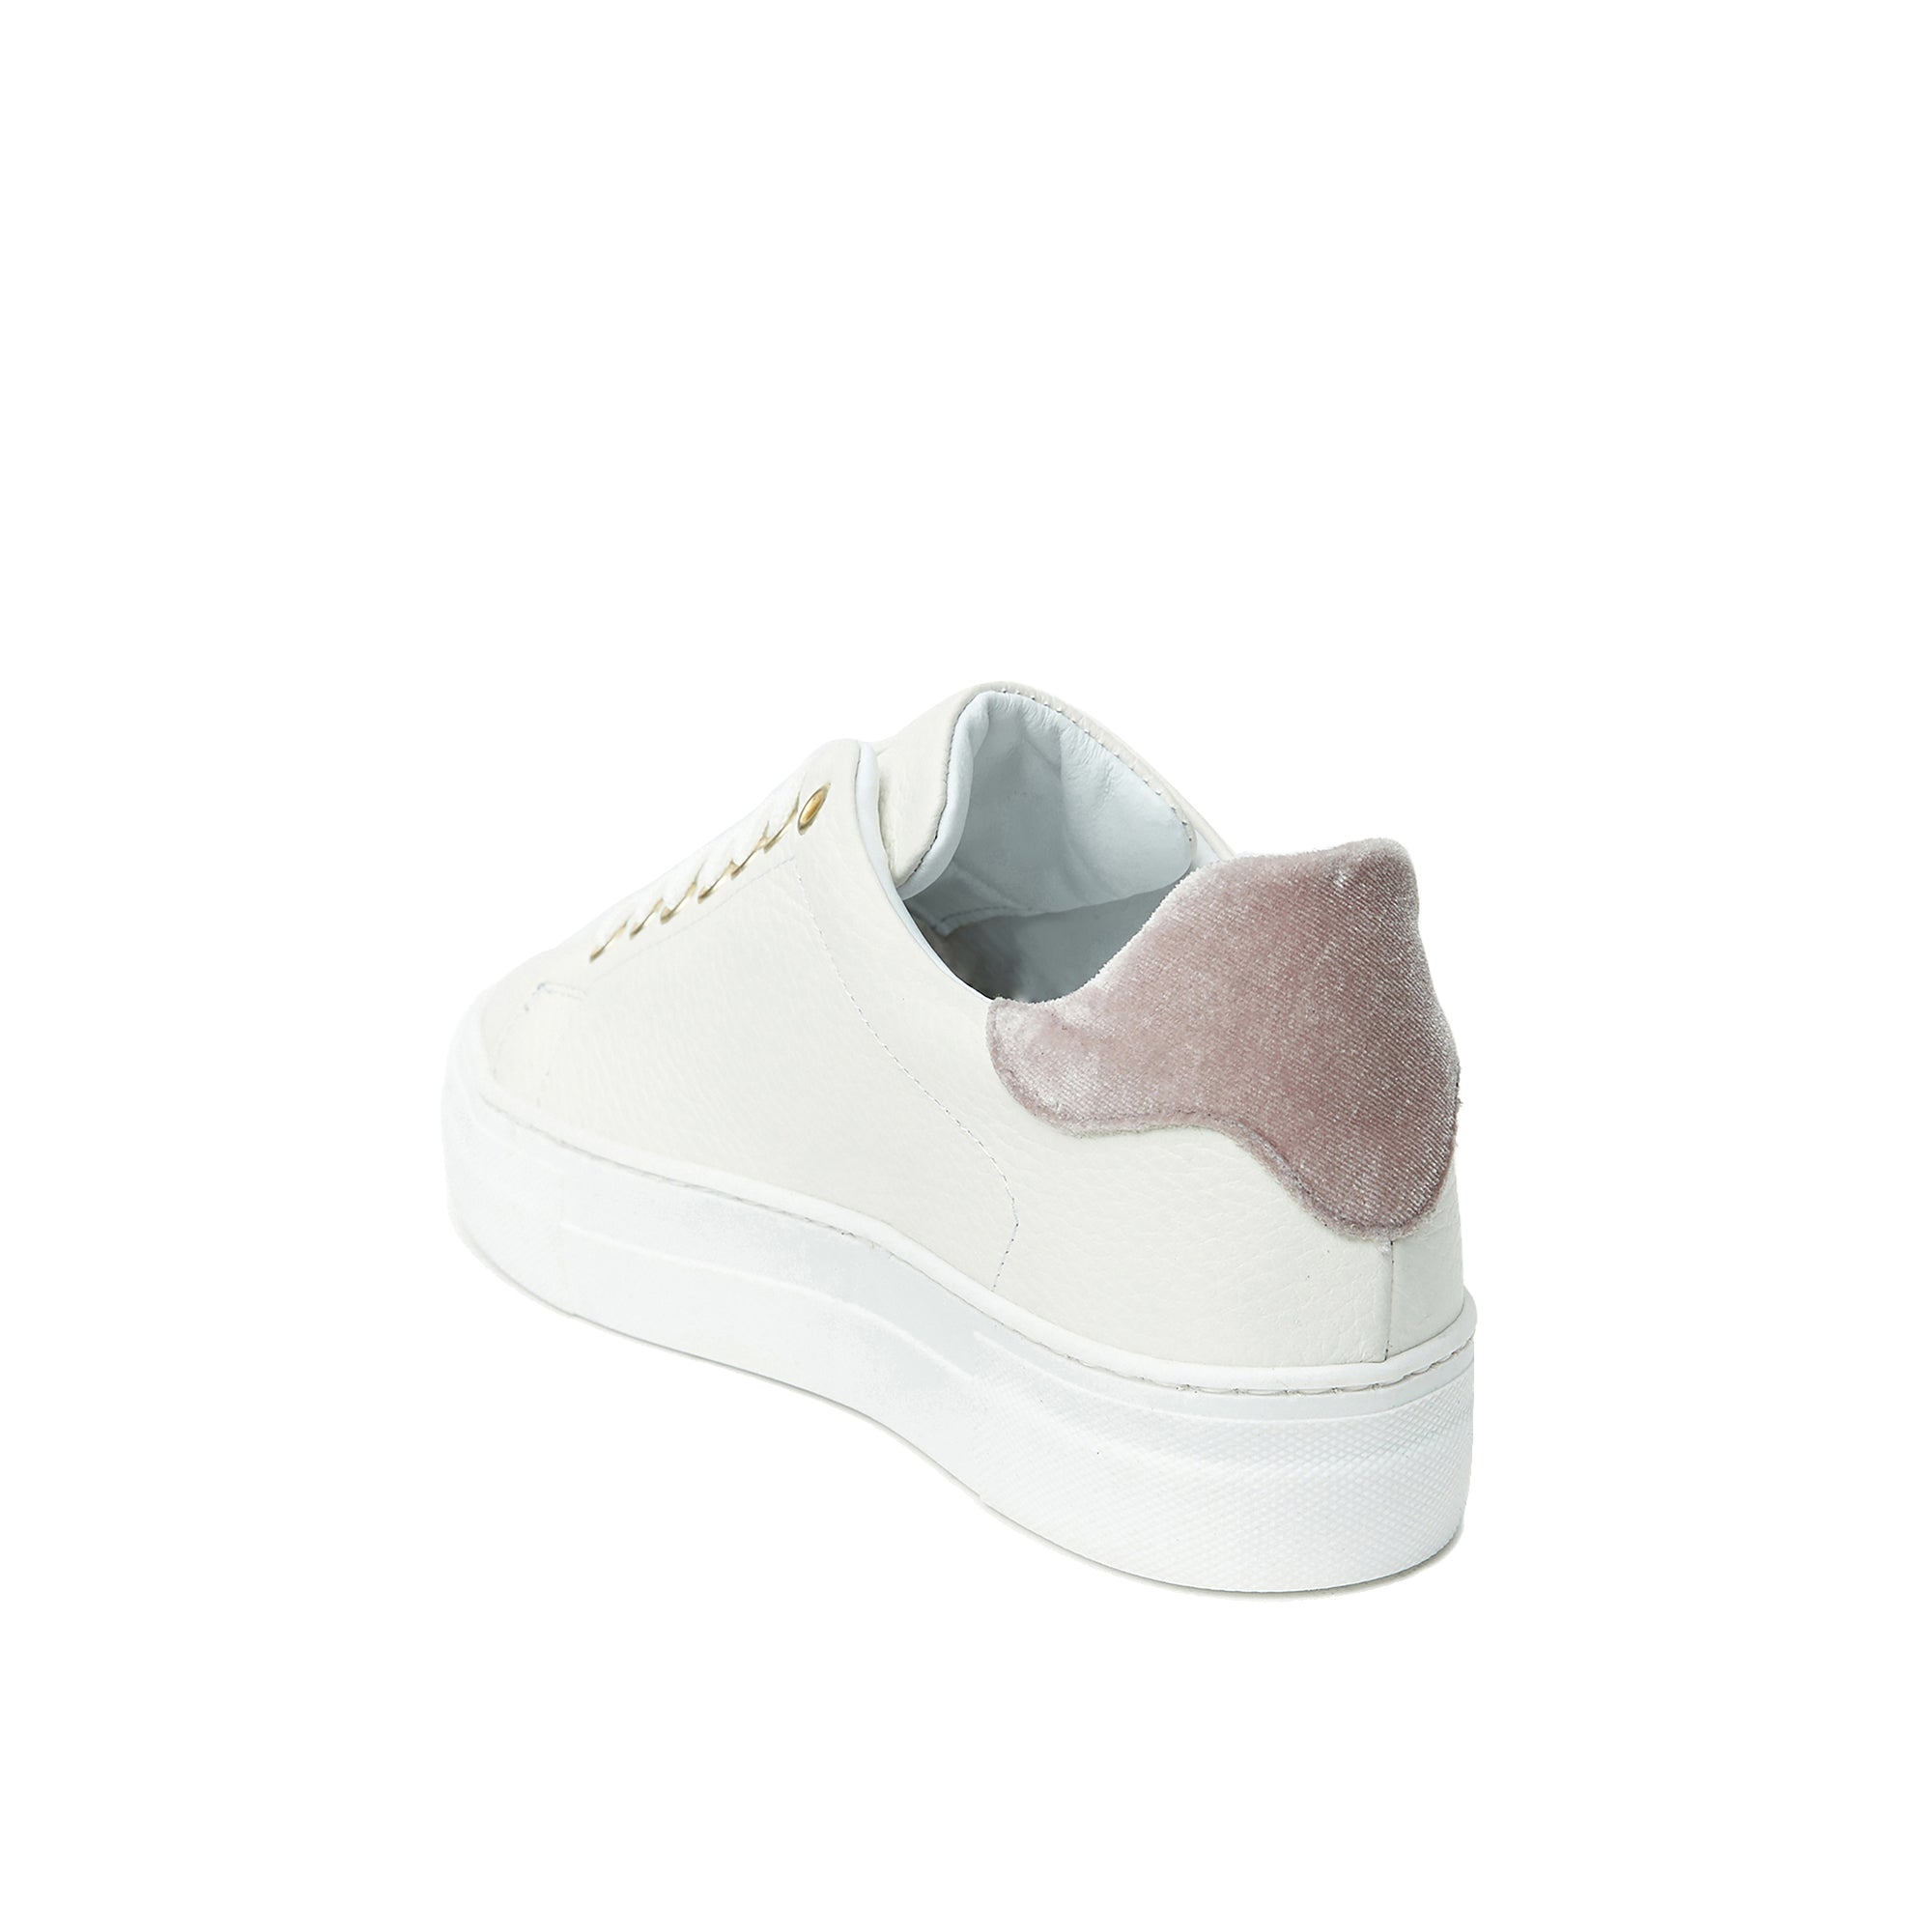 Sneaker cream white and pink